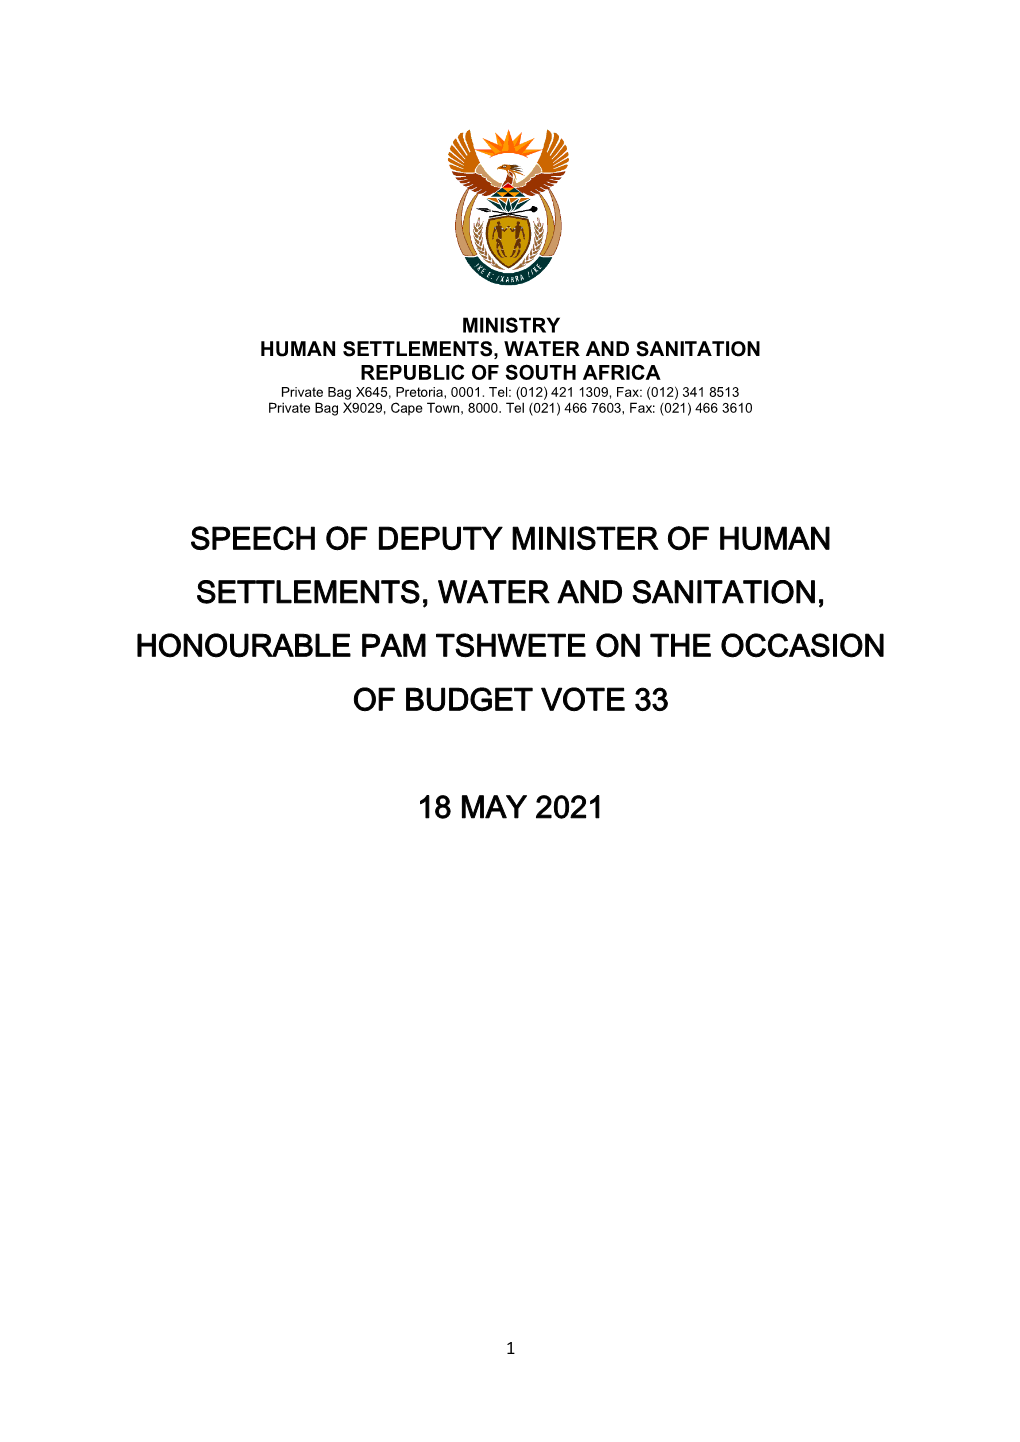 Speech of Deputy Minister of Human Settlements, Water and Sanitation, Honourable Pam Tshwete on the Occasion of Budget Vote 33